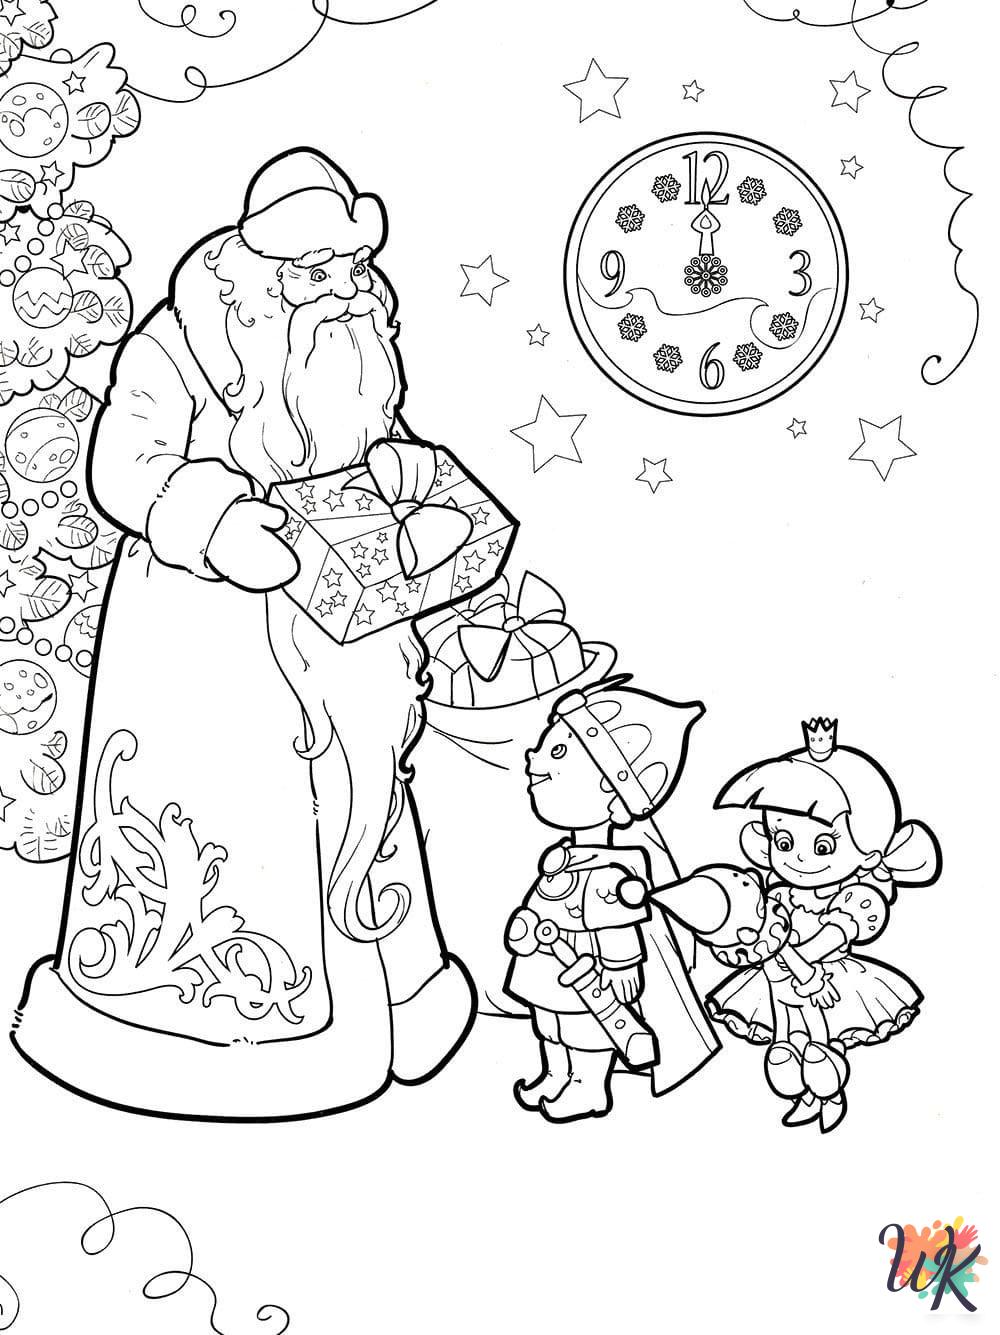 Santa coloring pages for kids